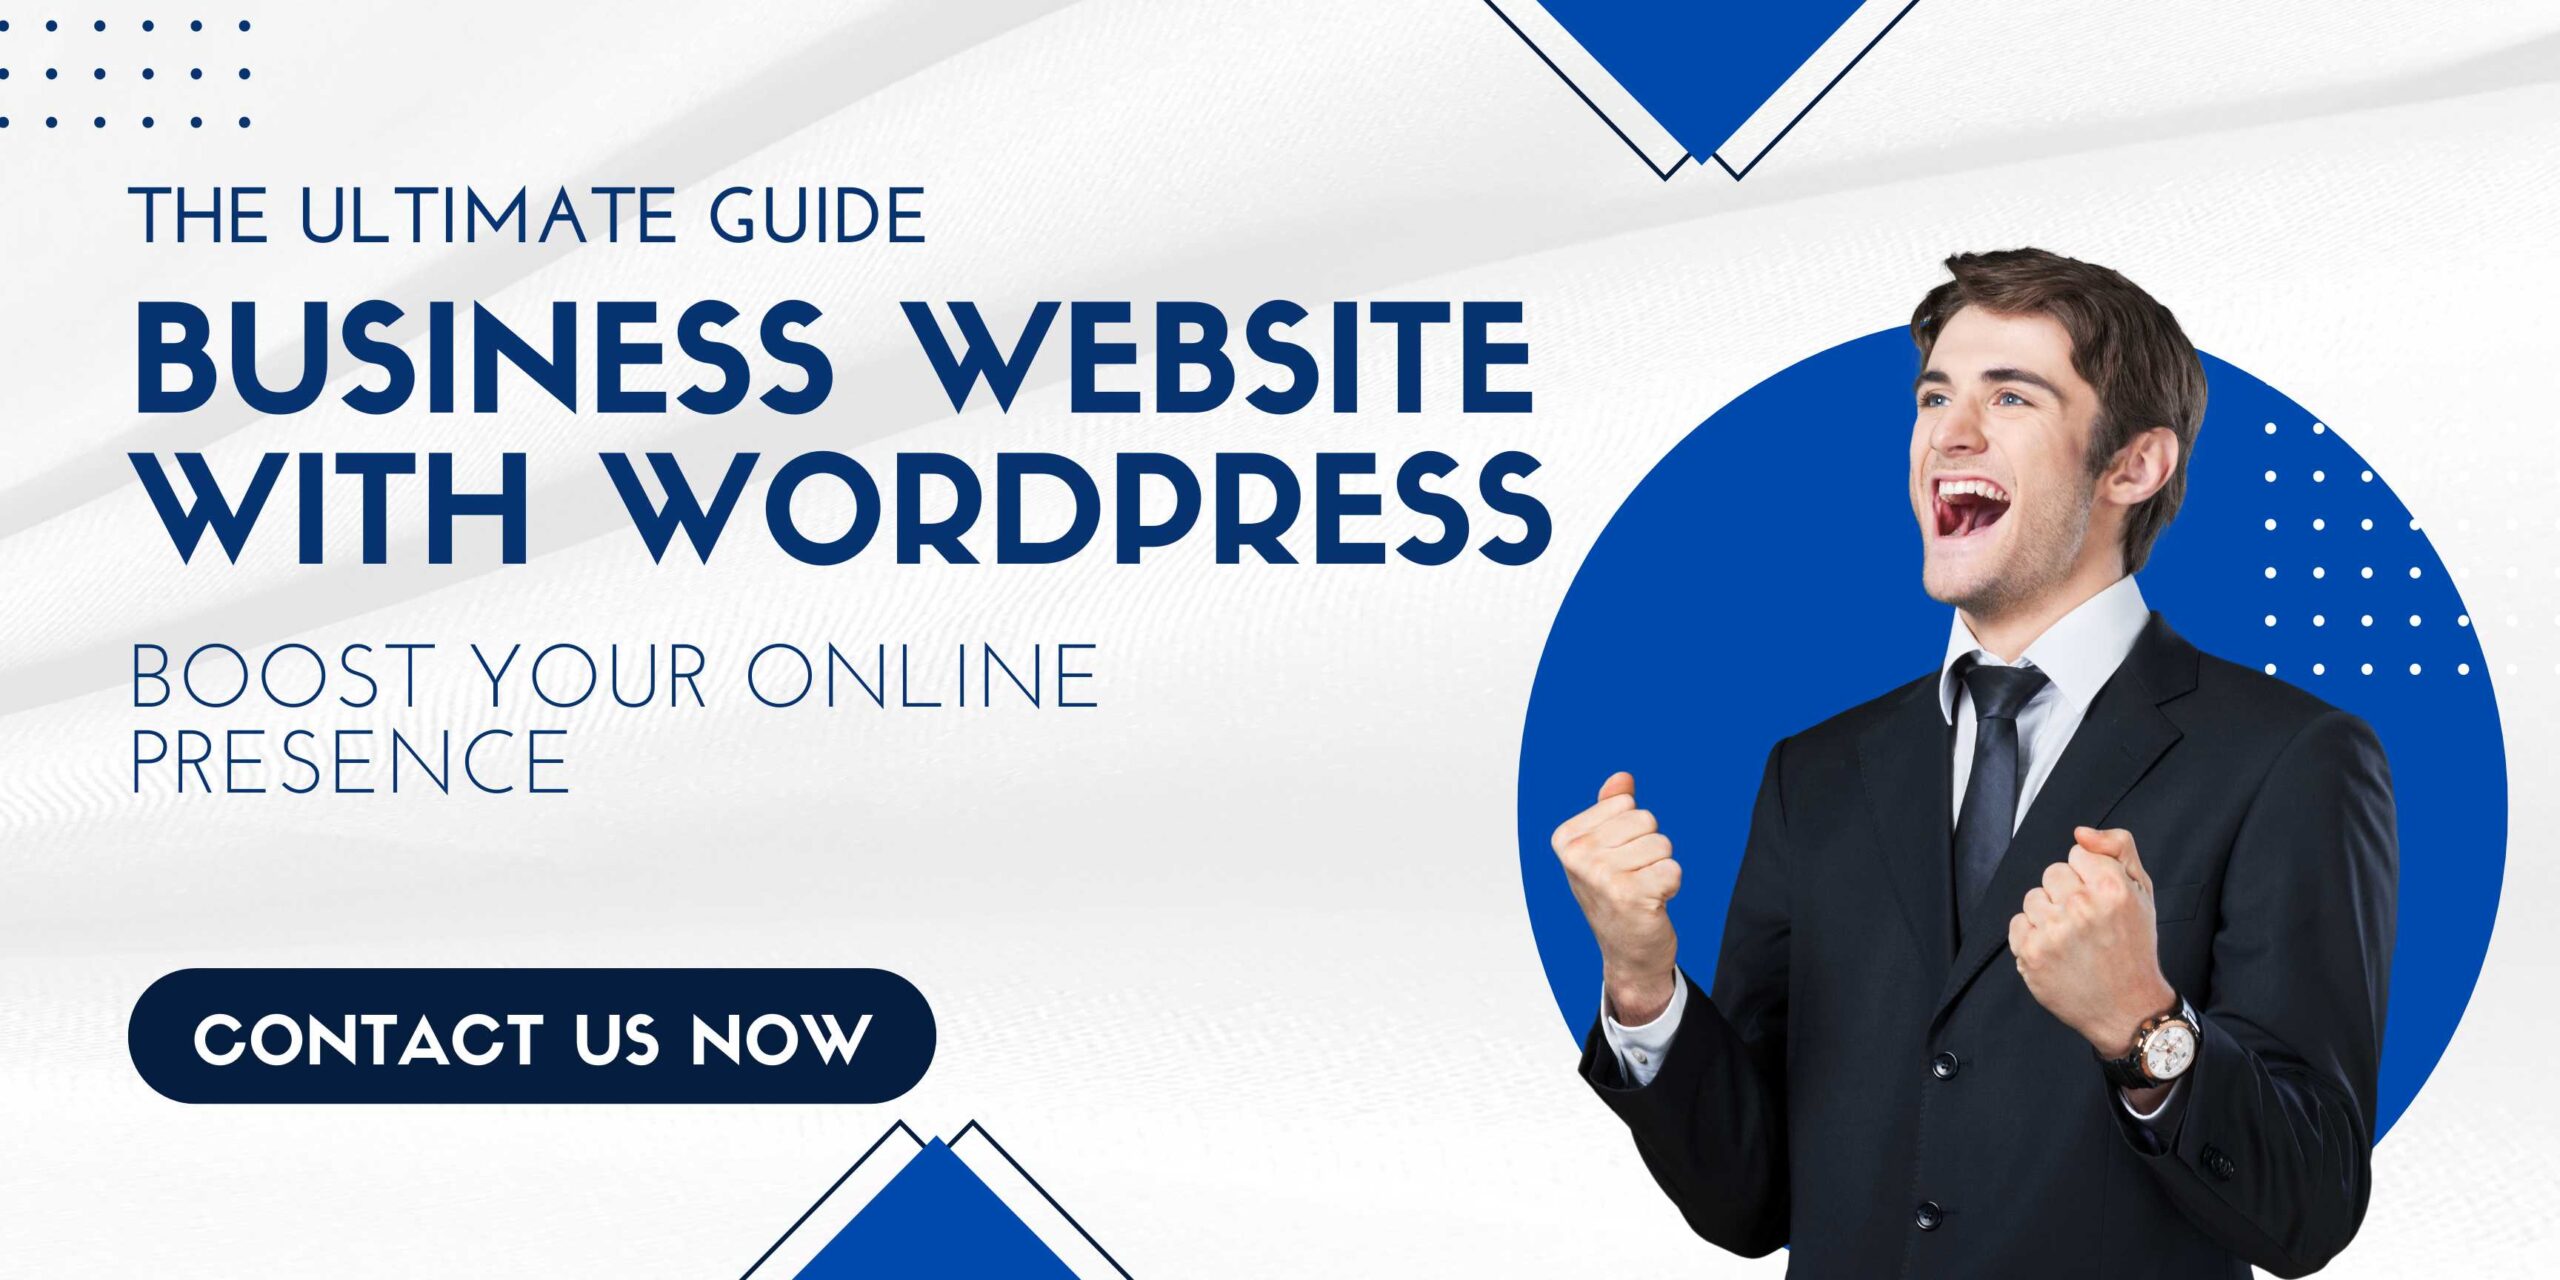 THE-ULTIMATE-GUIDE-TO-BUILDING-YOUR-BUSINESS-WEBSITE